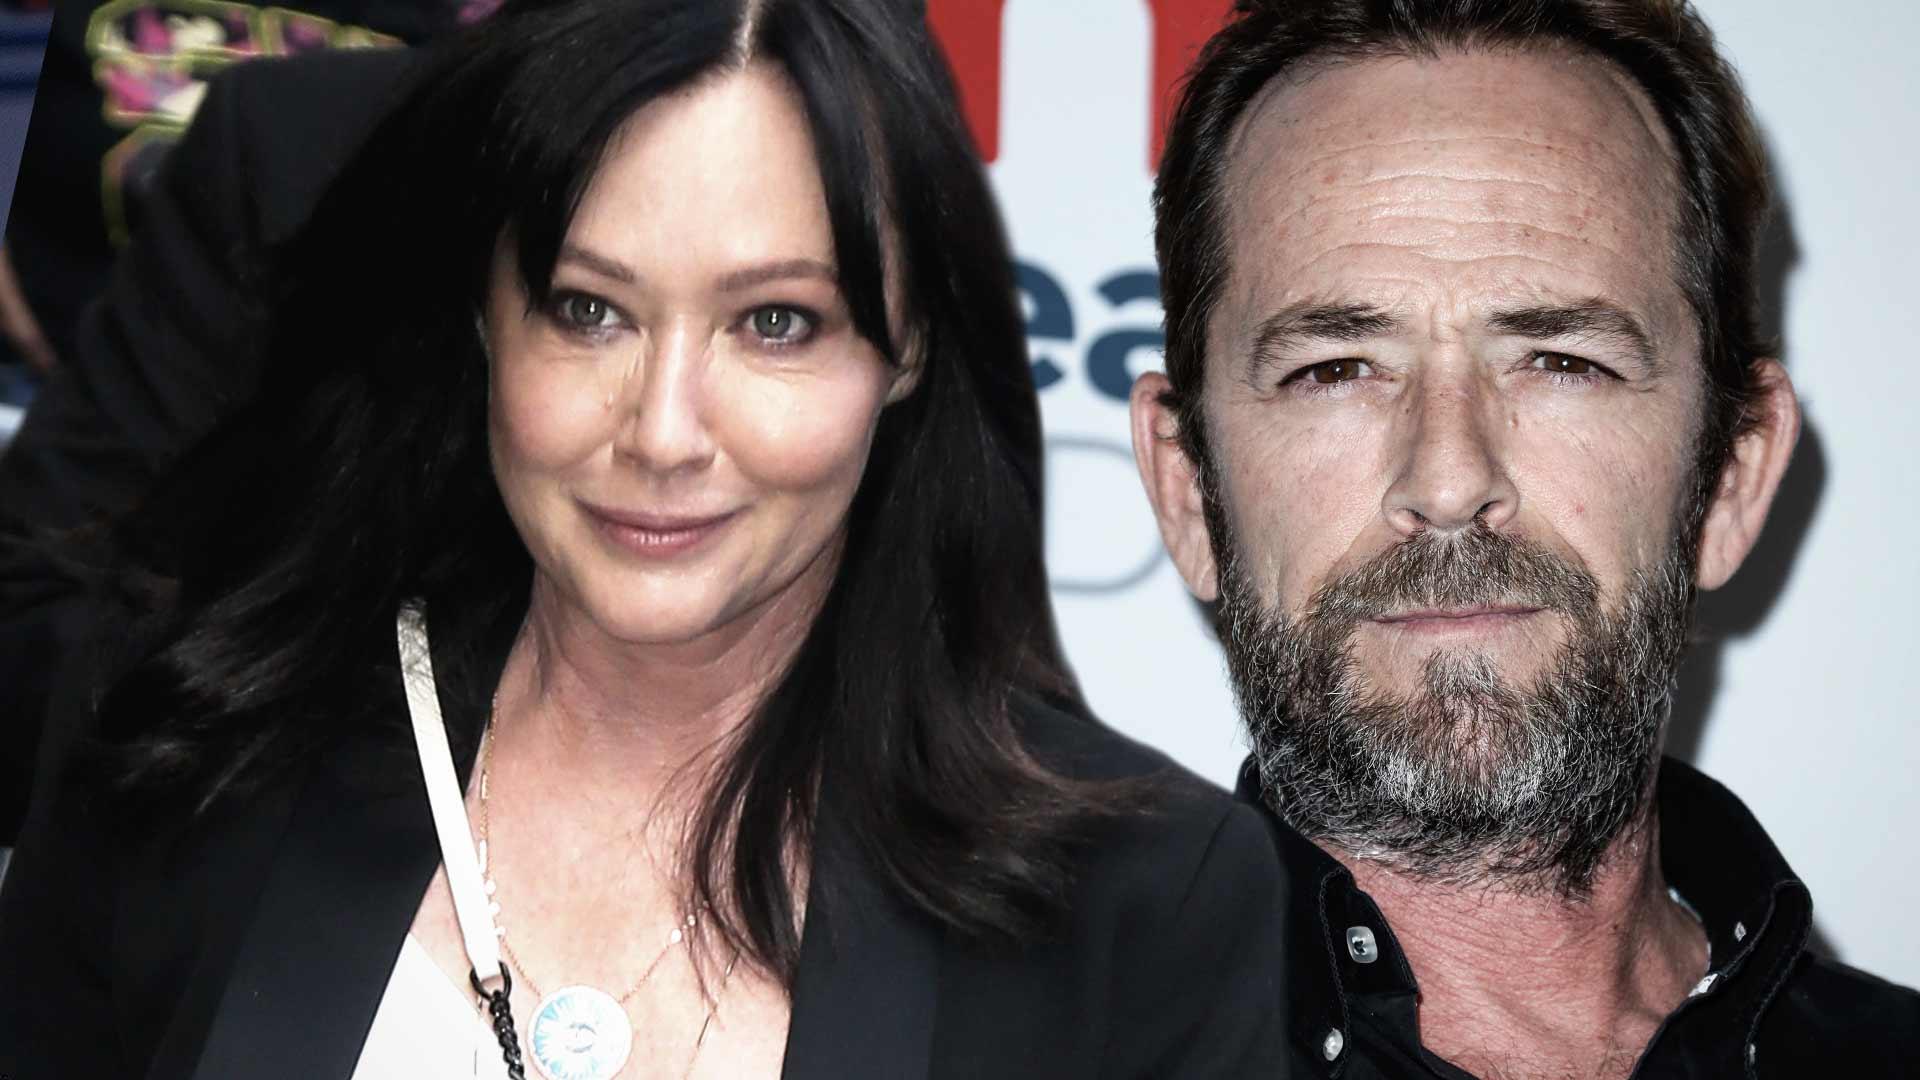 ‘90210’ Star Shannen Doherty Kept Stage 4 Cancer Diagnosis Quiet After Luke Perry’s Death